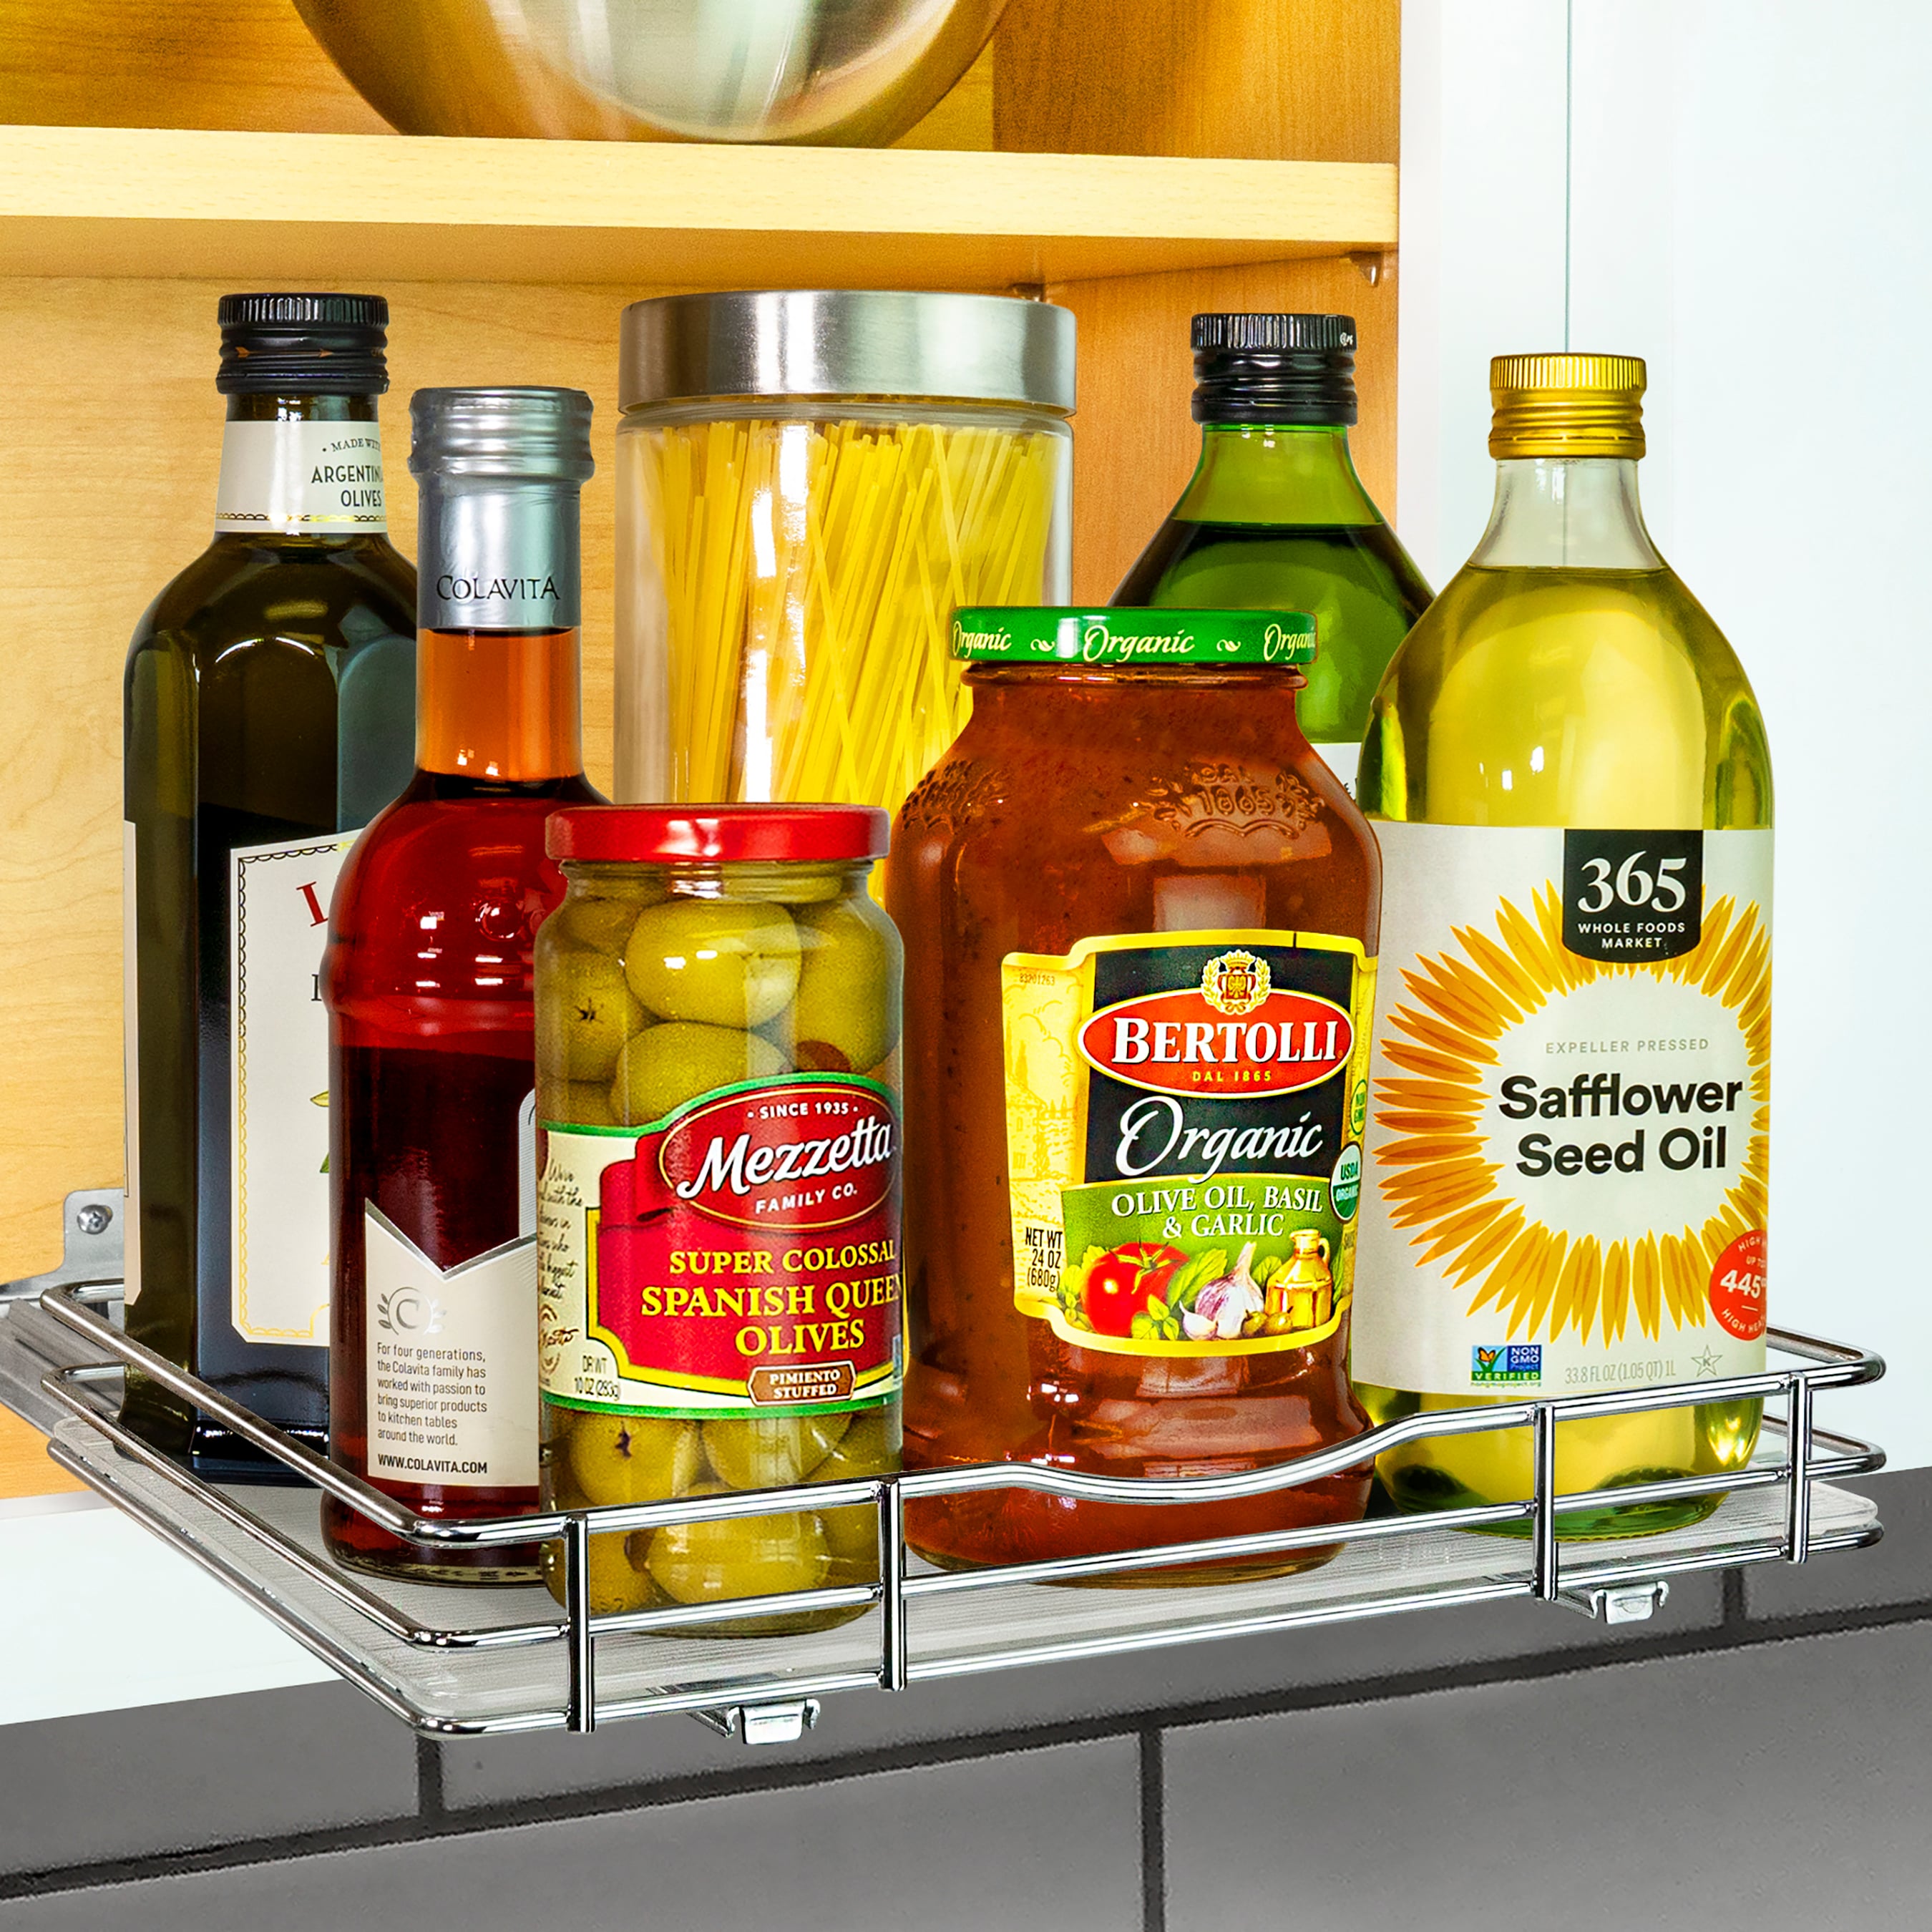 Lynk Professional Spice Rack Slide Out Cabinet Organizer - Chrome